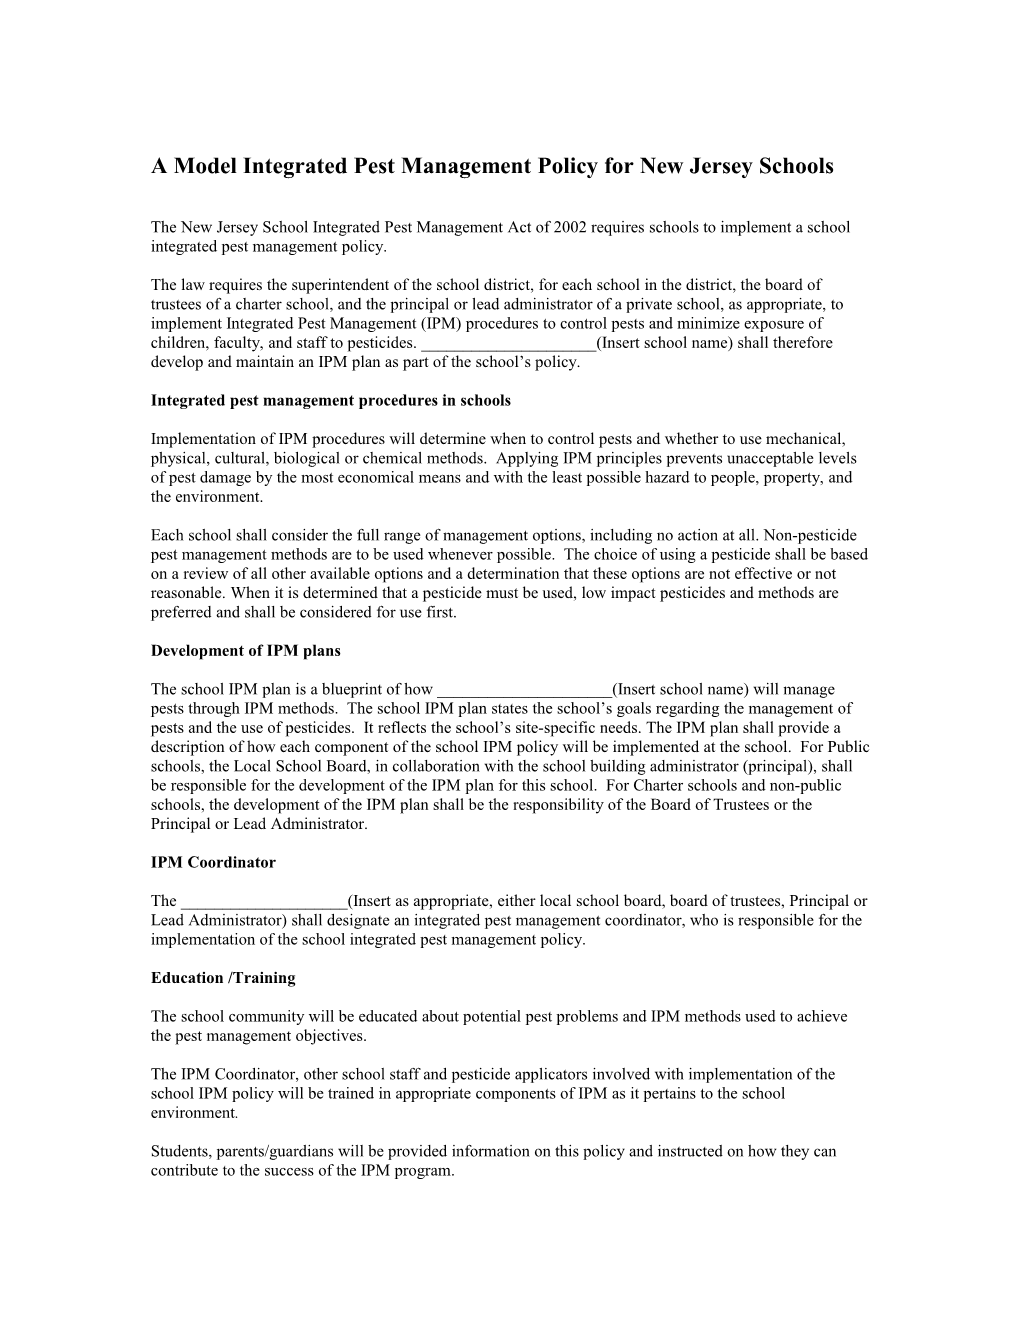 A Model Integrated Pest Management Policy for New Jersey Schools